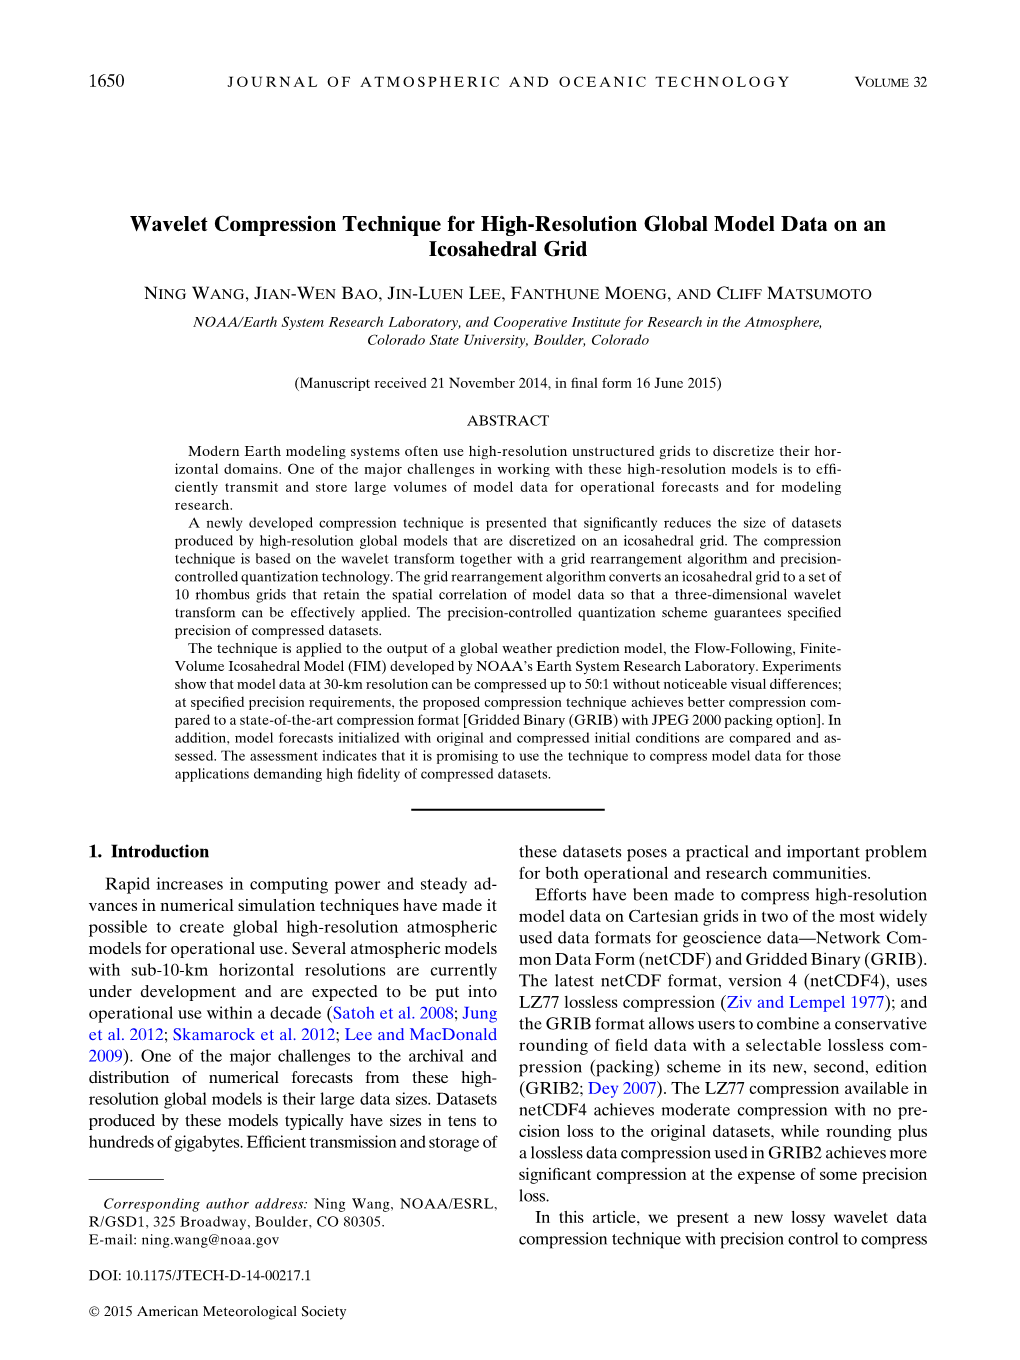 Wavelet Compression Technique for High-Resolution Global Model Data on an Icosahedral Grid